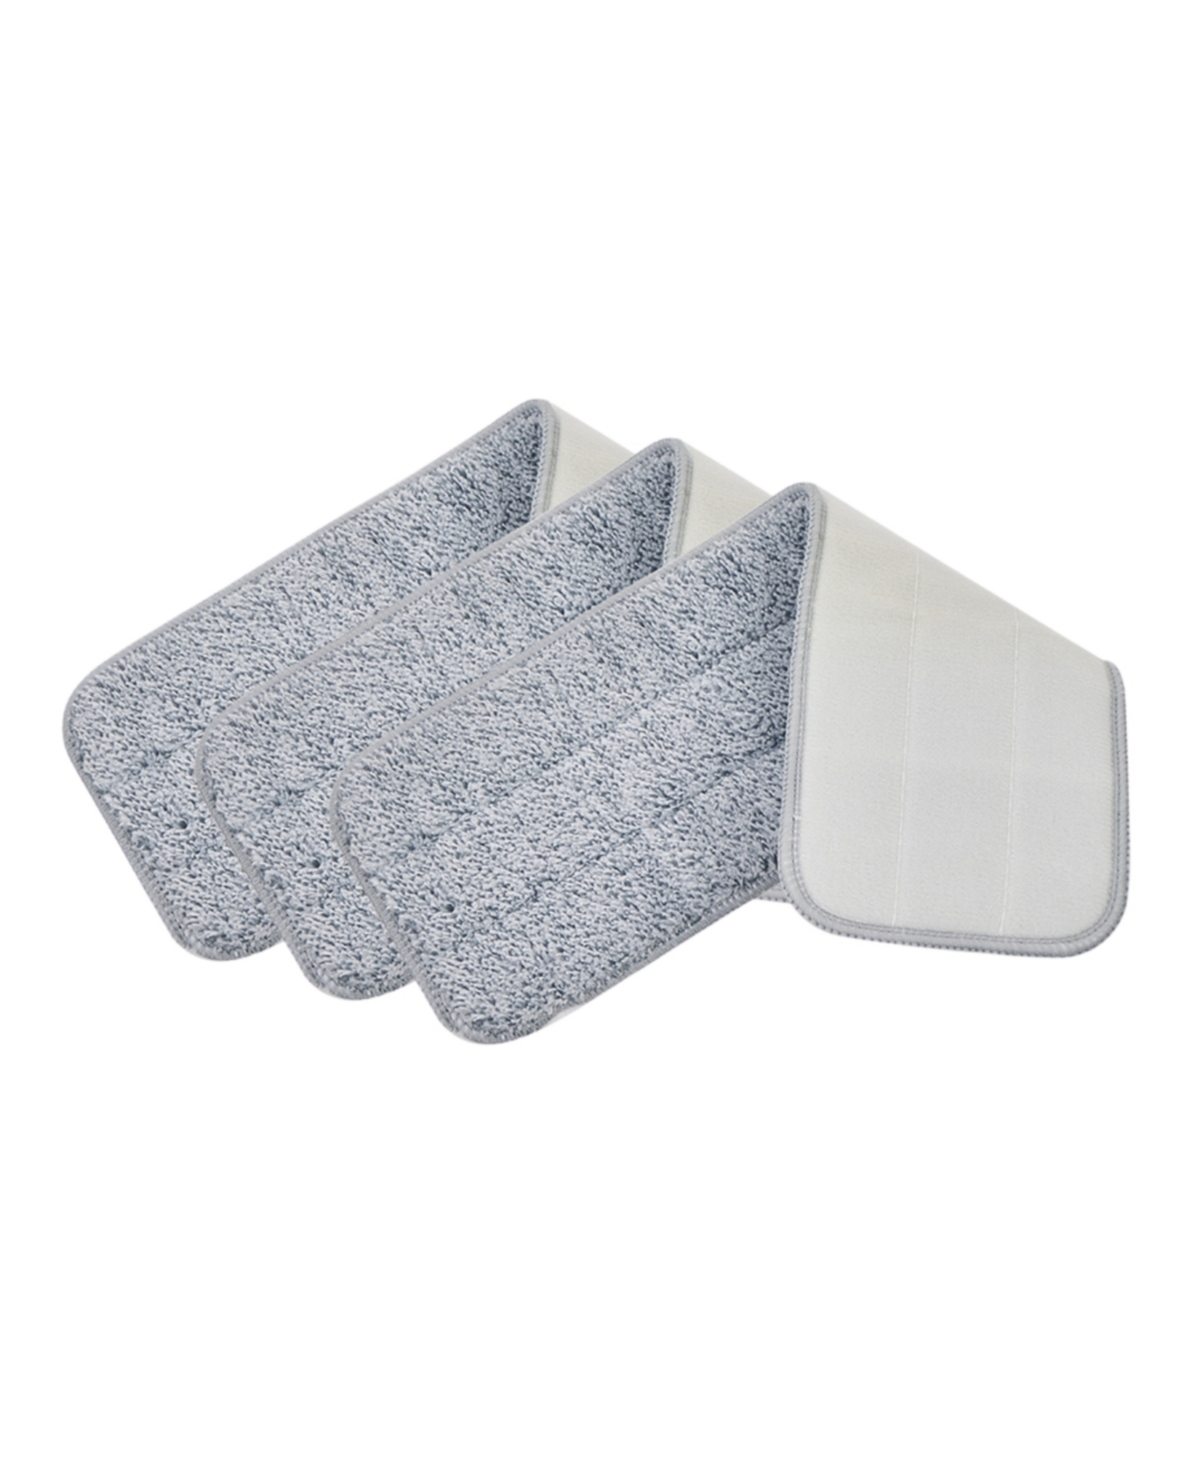 3-piece Mop Pad Replacement for Spray-250 Spray Mop - Gray